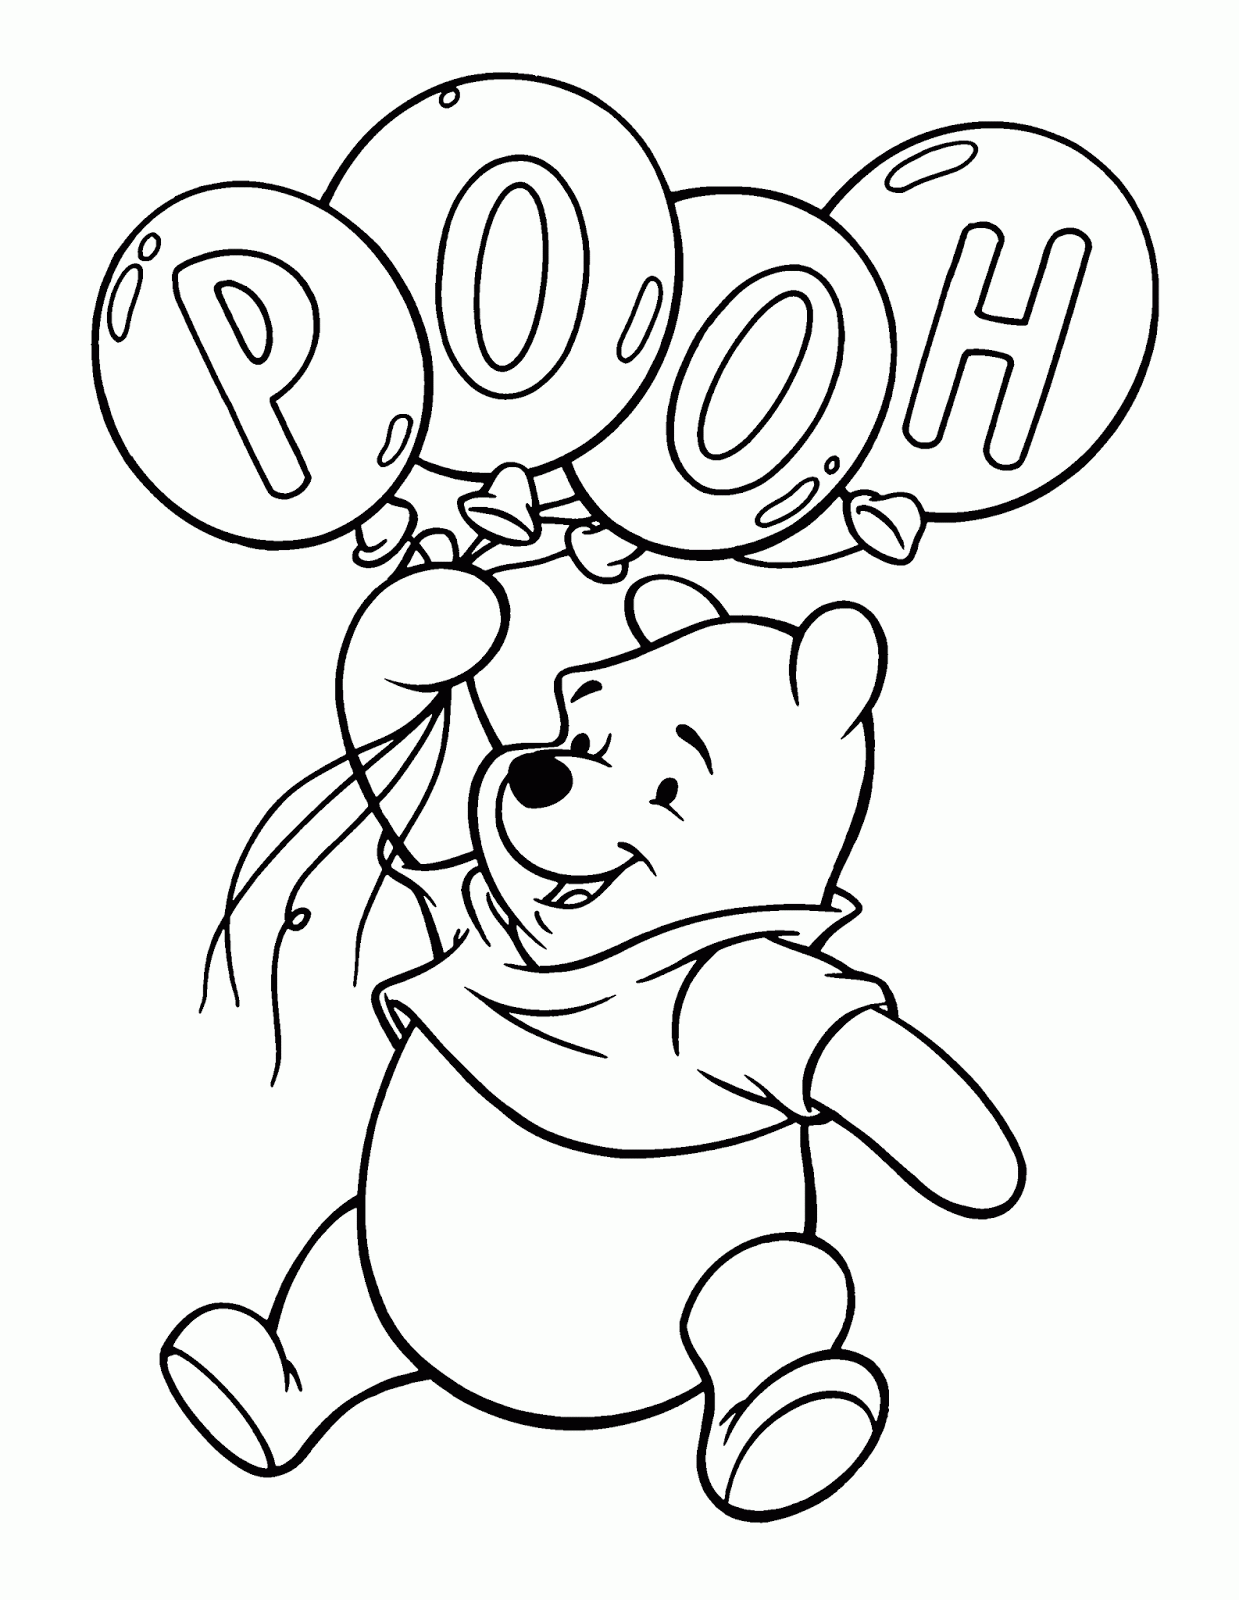 Download Coloring Pages Winnie the Pooh | Kids Online World Blog